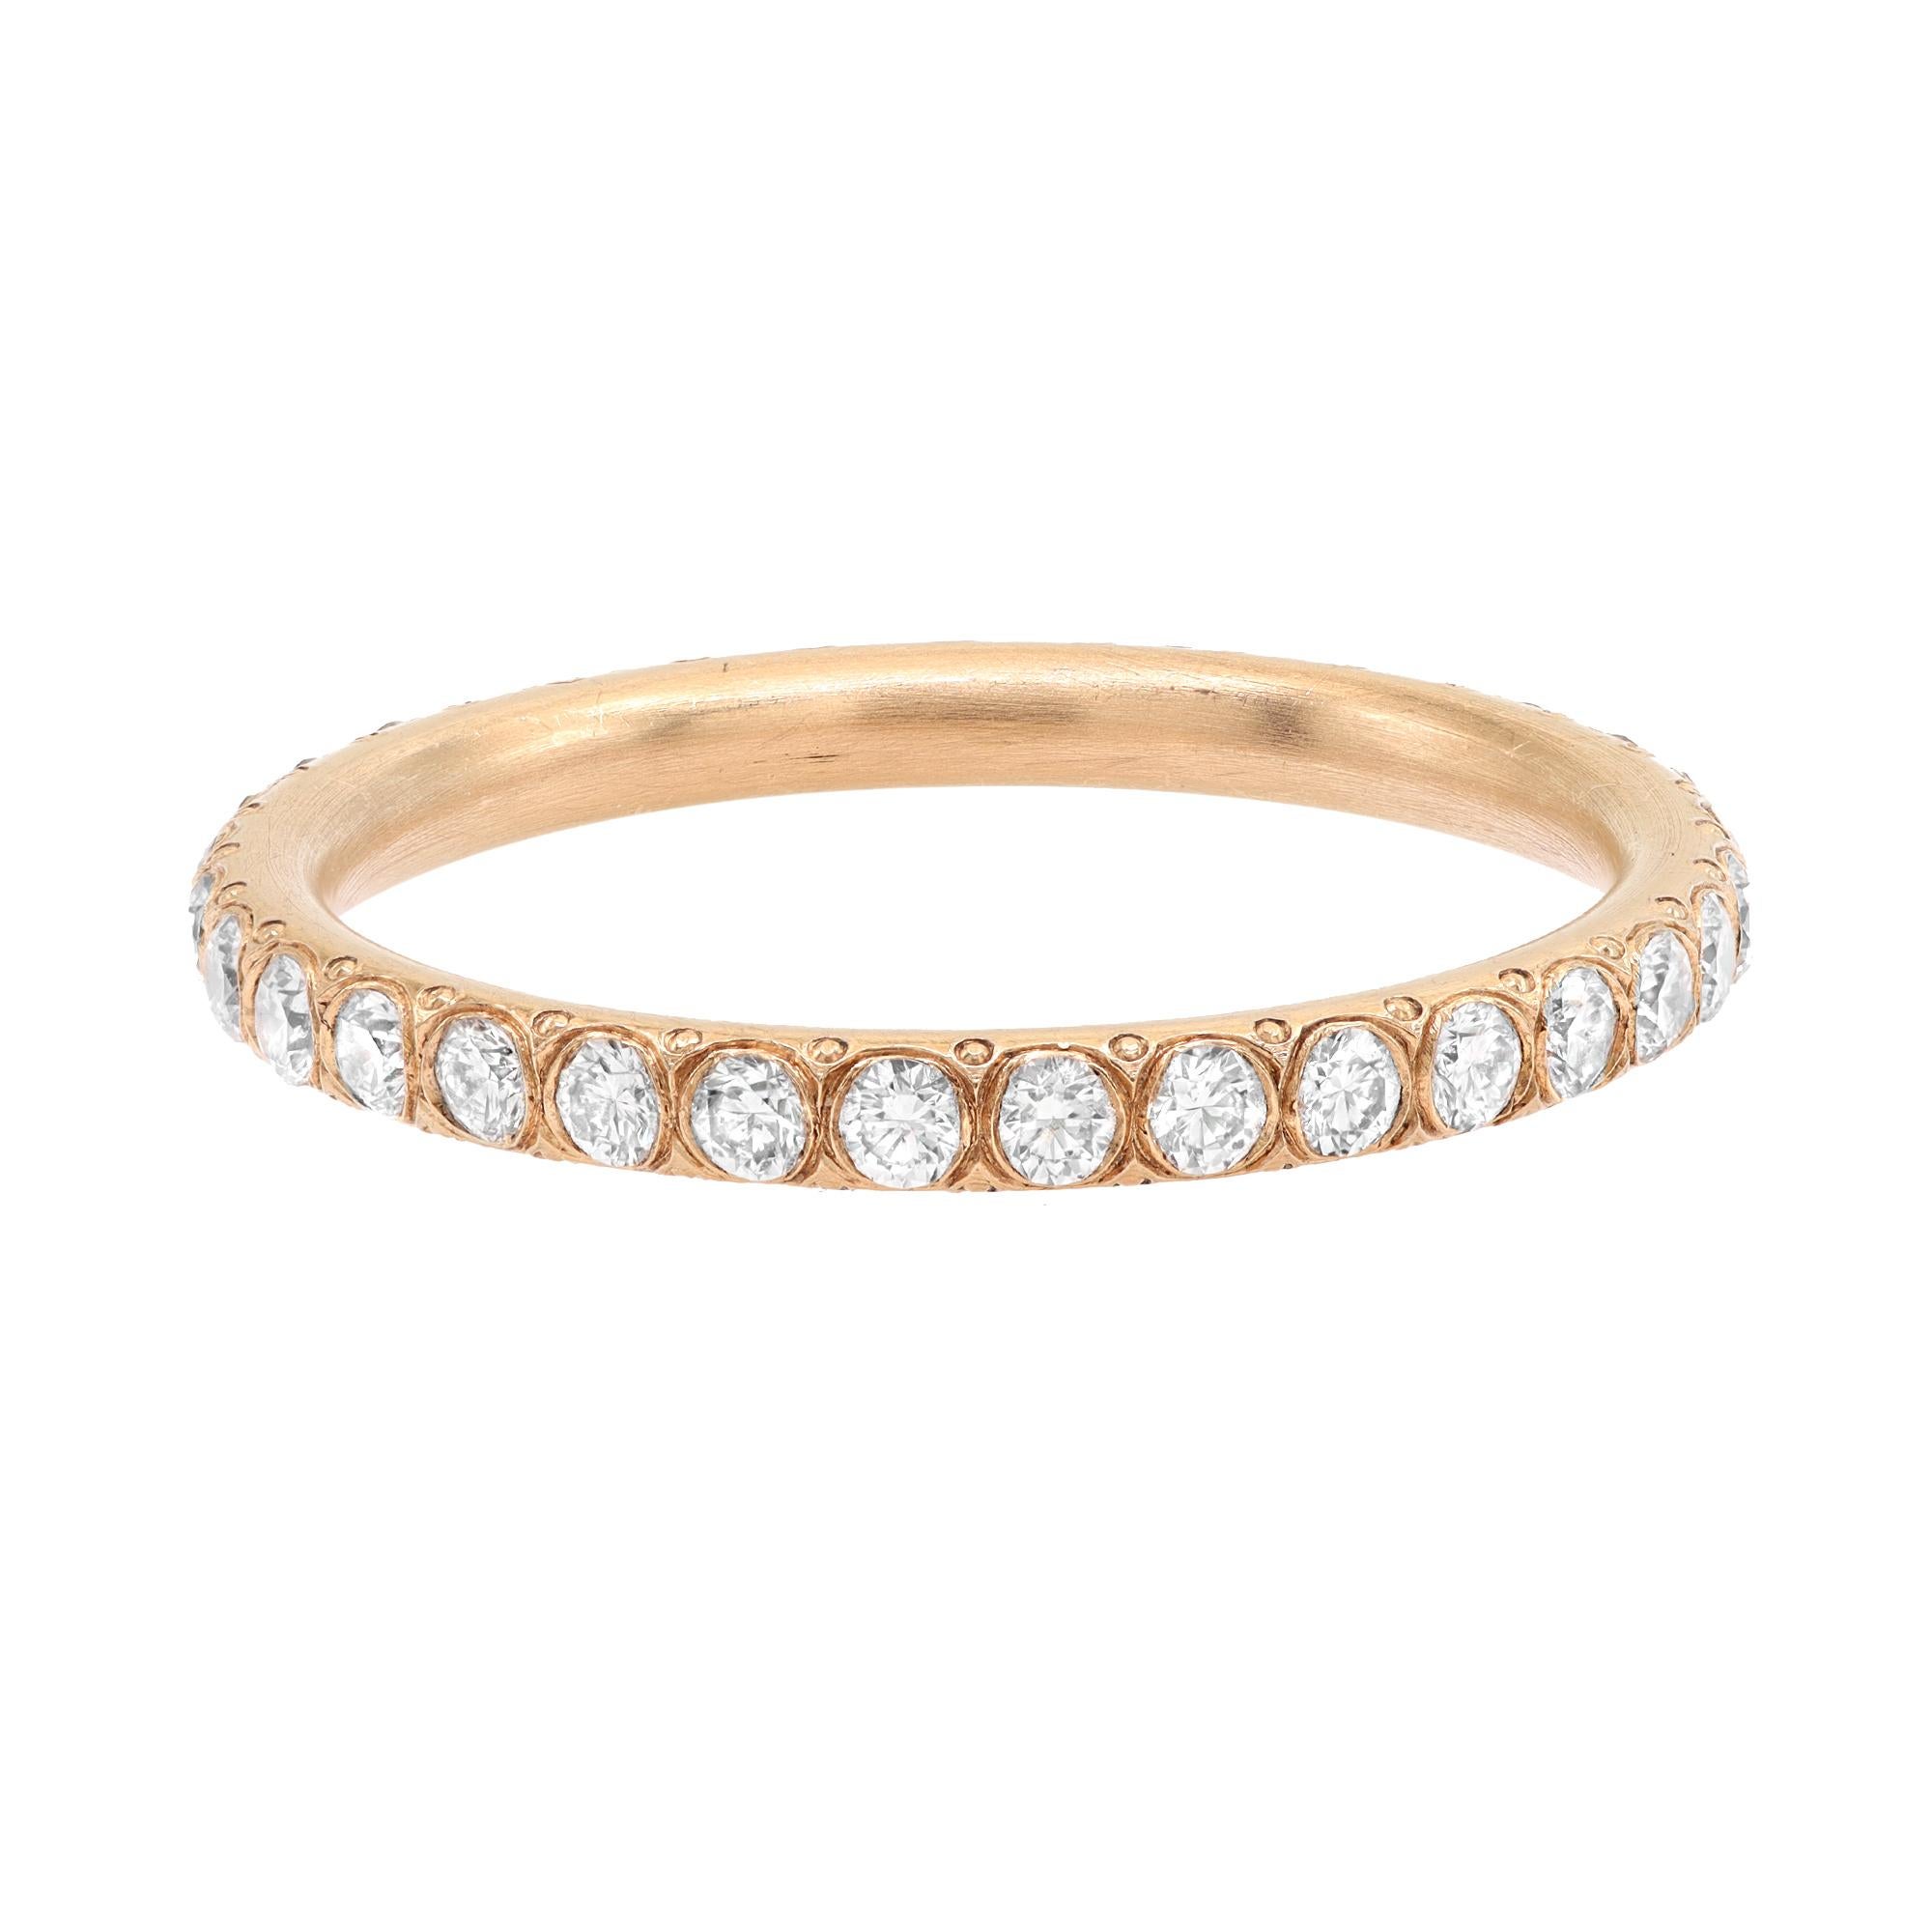 Round Cut Art Deco Setting Diamond Eternity Band Ring 18K Rose Gold 0.65Cttw Size 5.25 For Sale